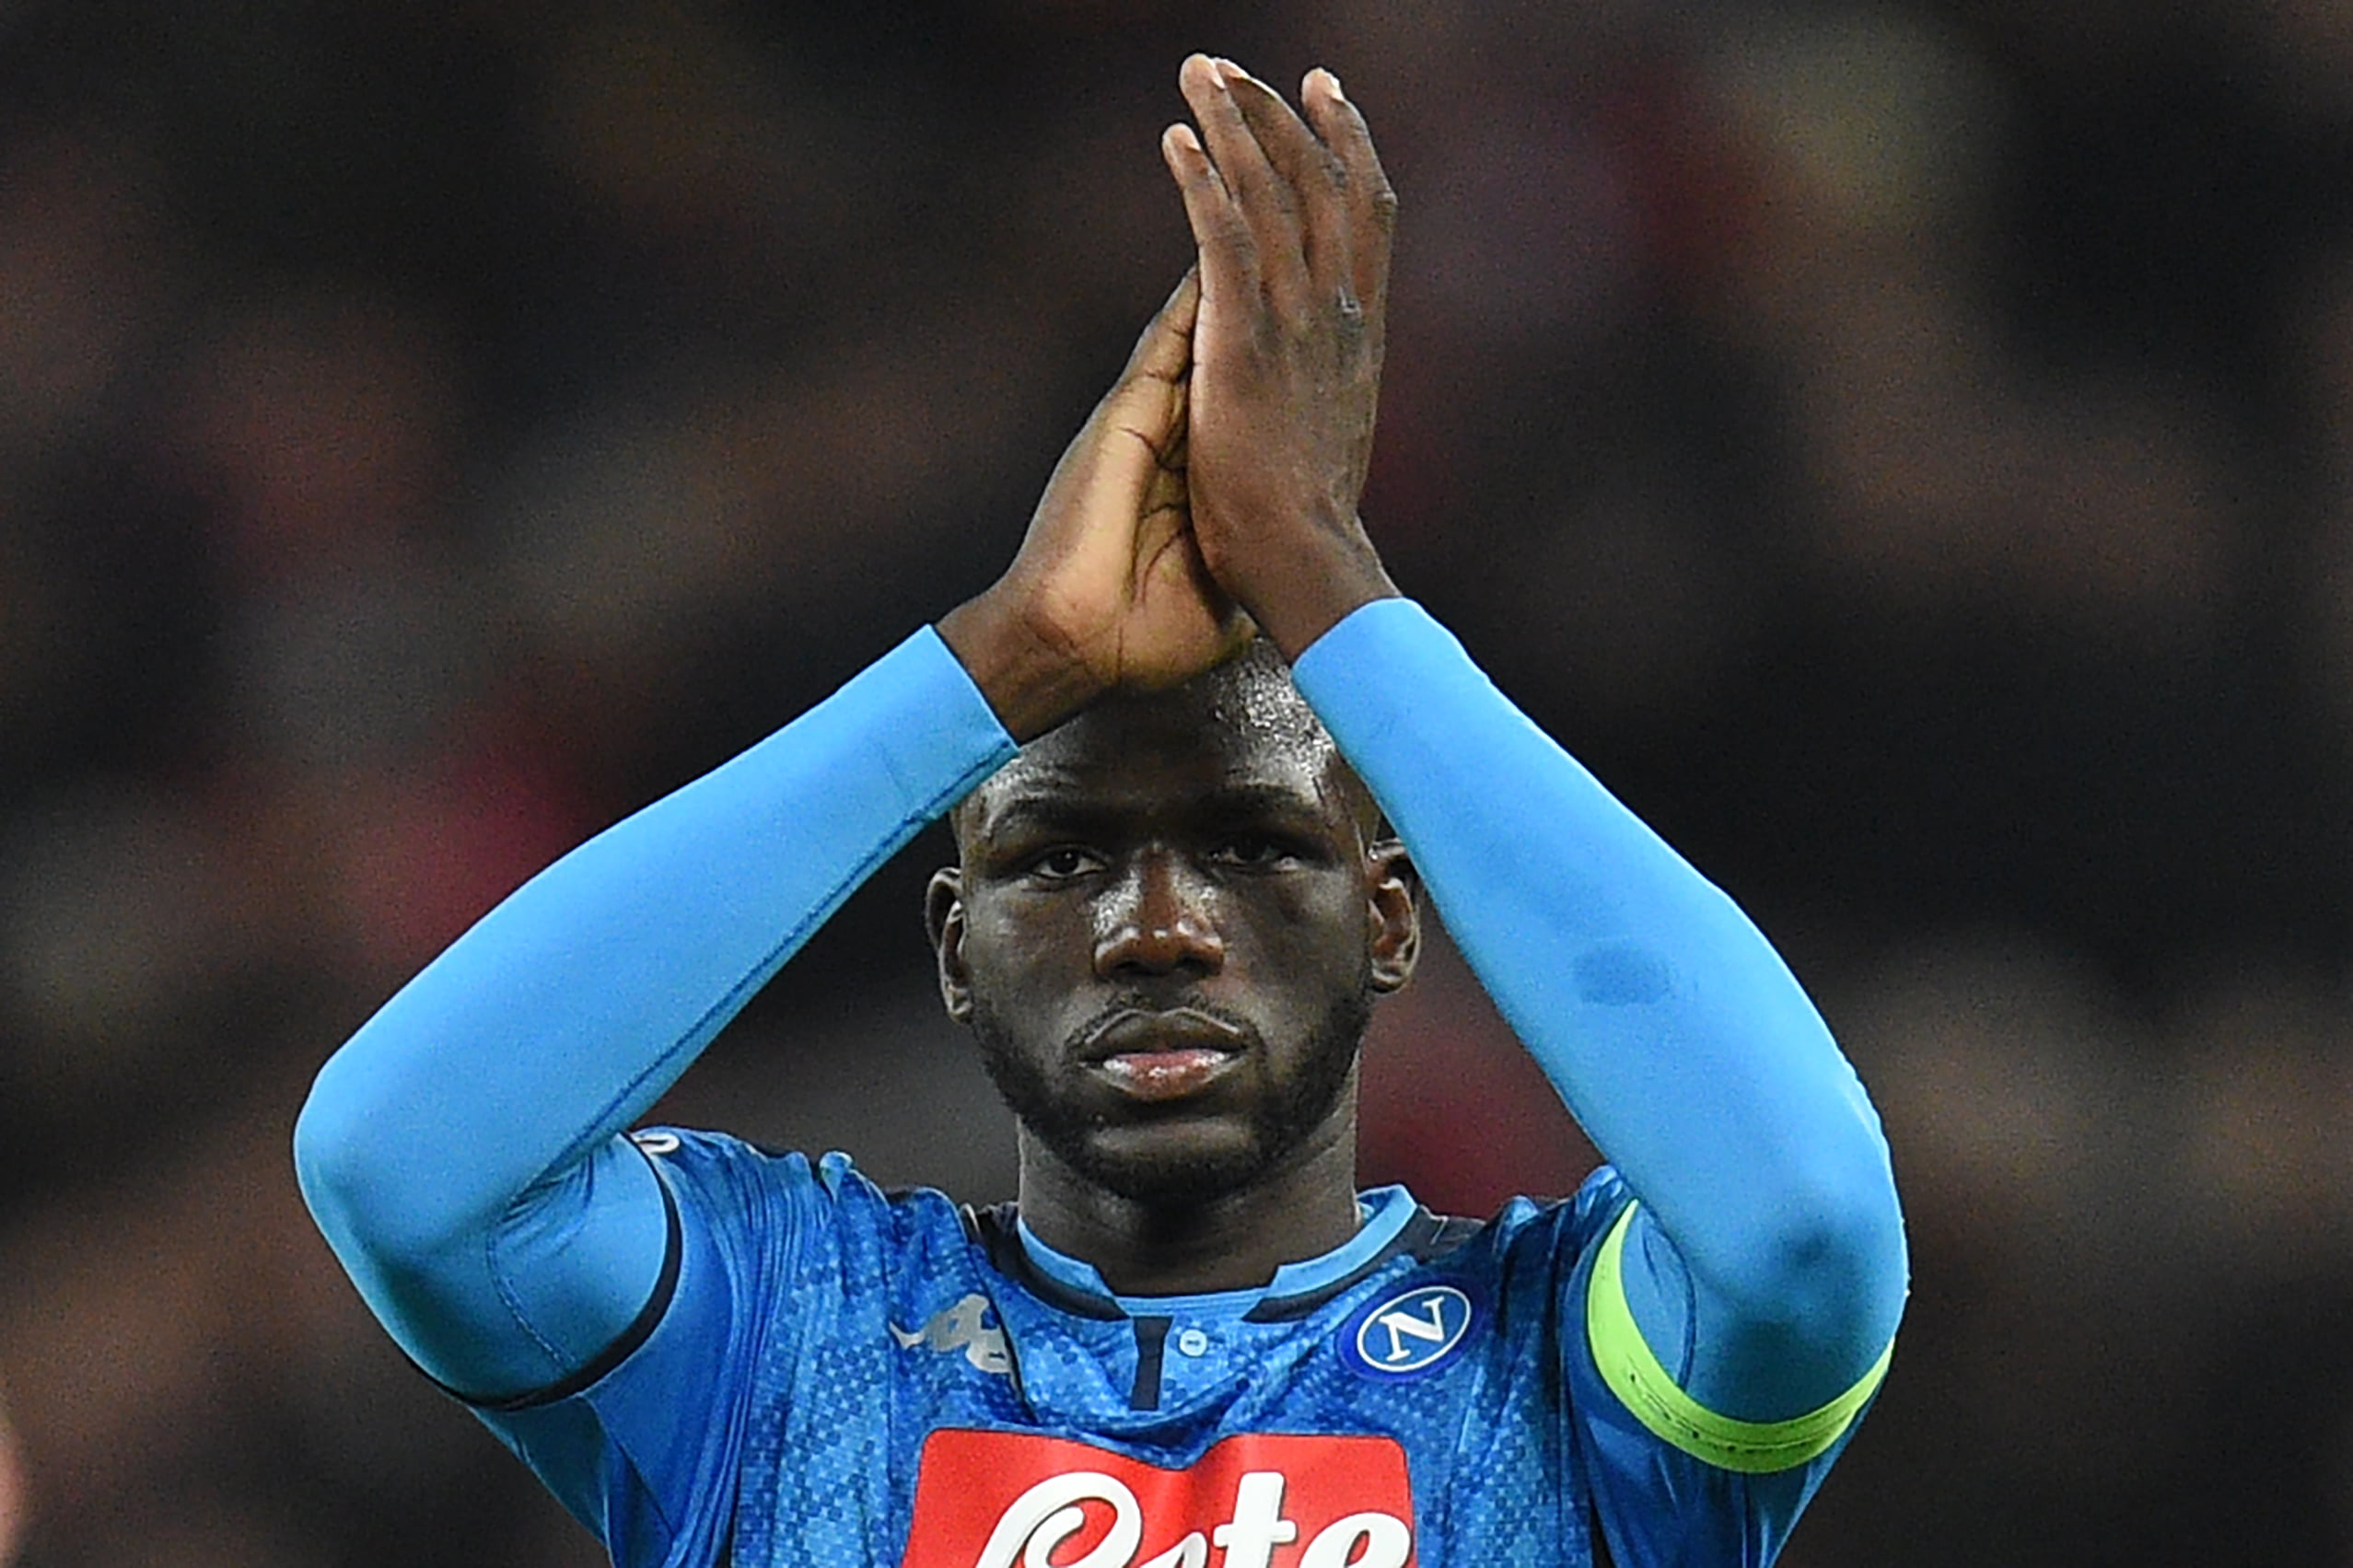 Liverpool are in hot pursuit of Kalidou Koulibaly who is clapping in the photo